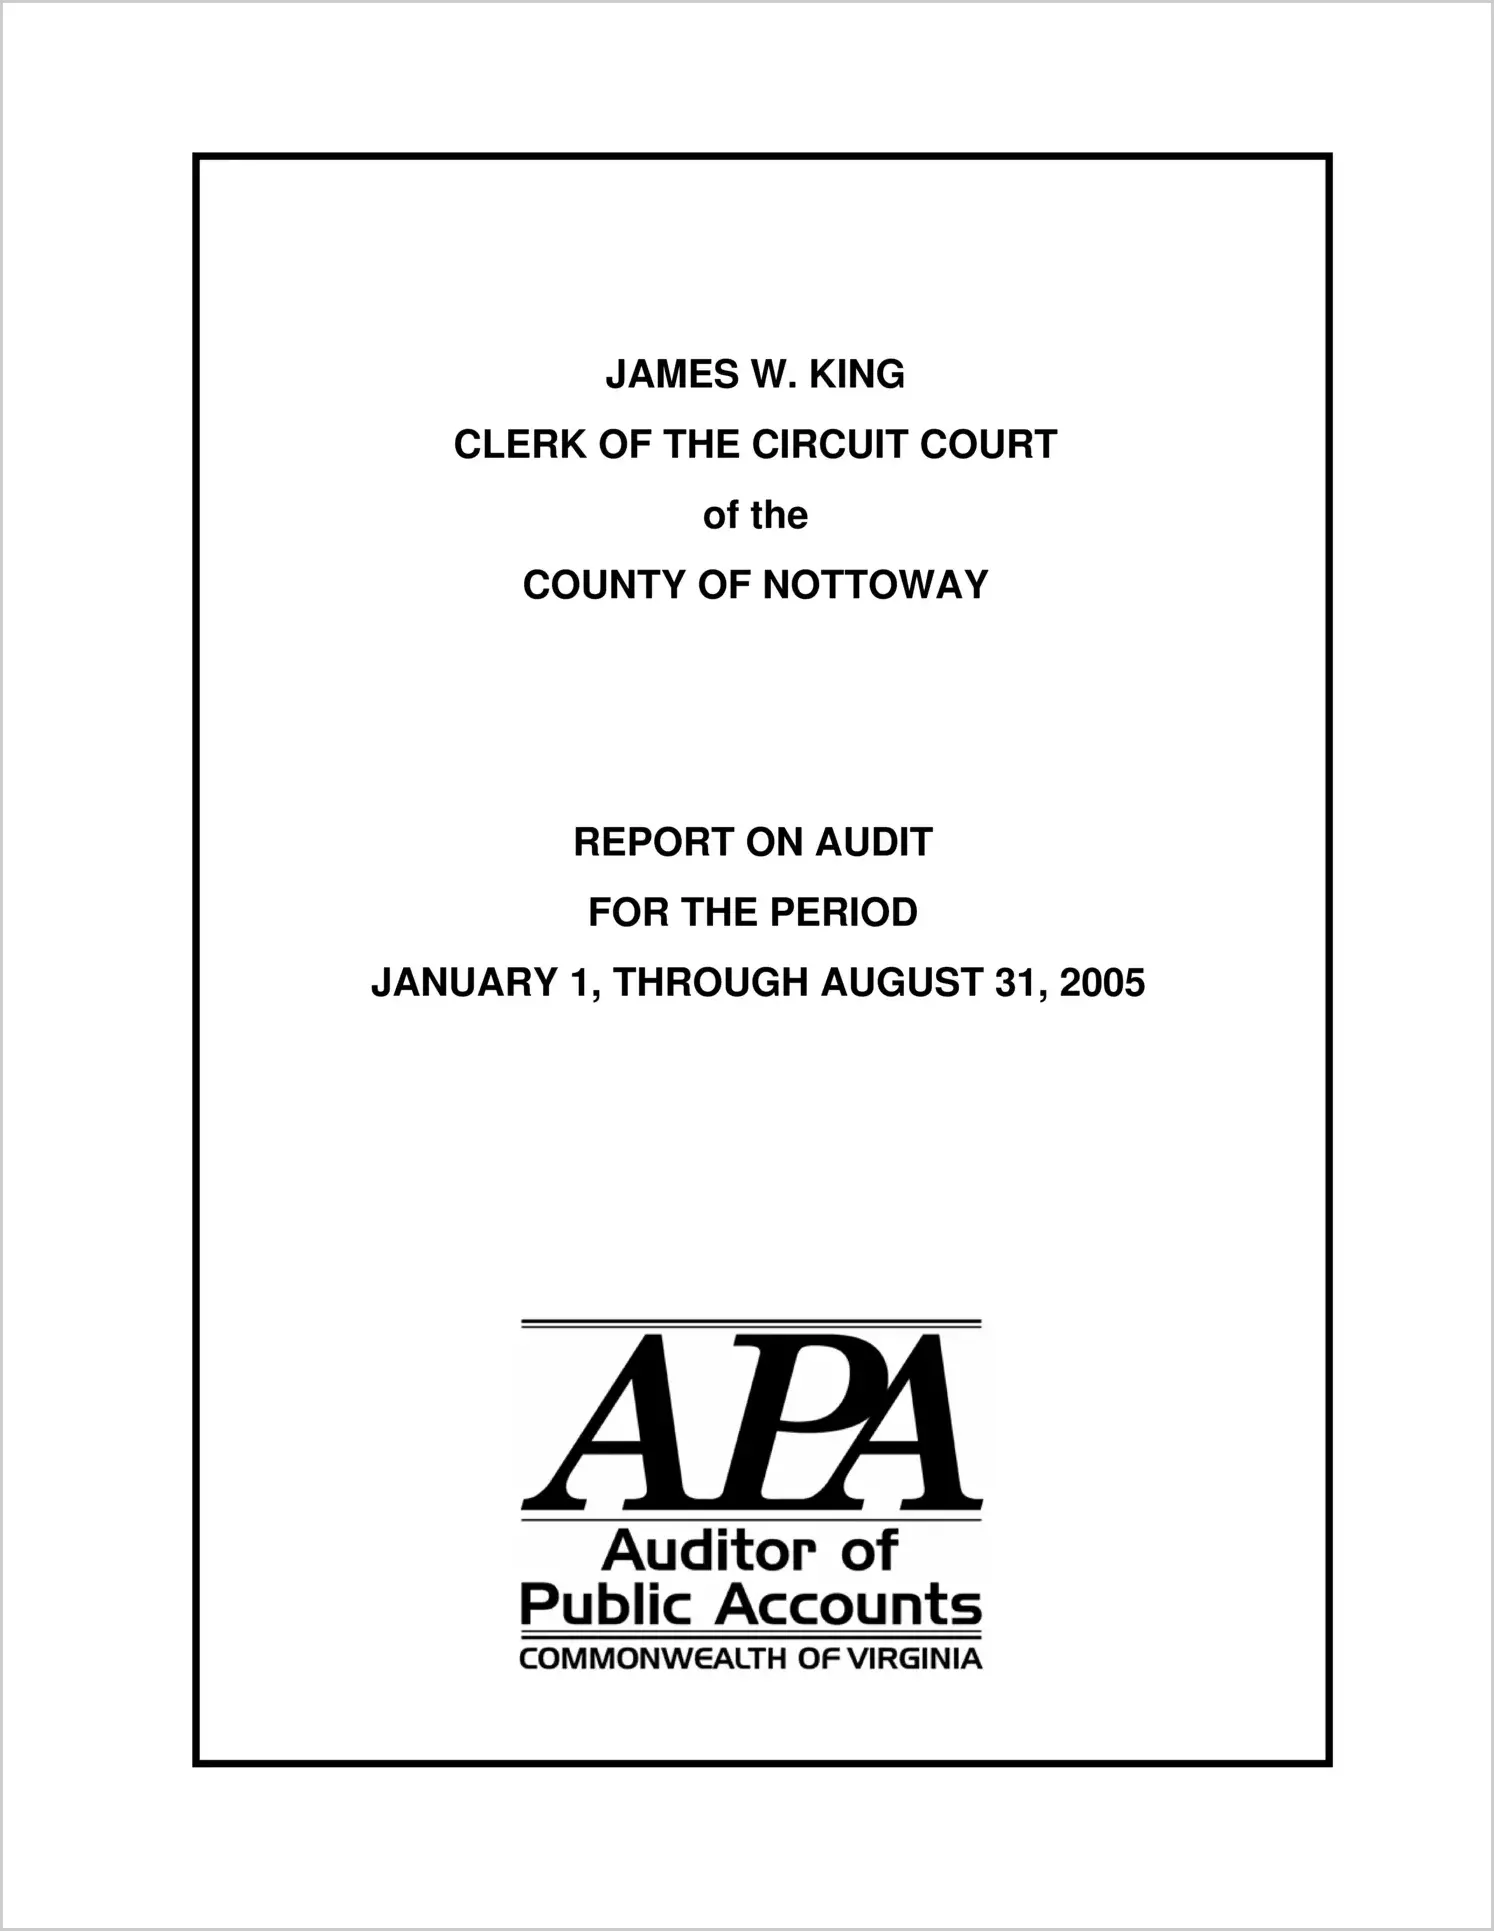 Clerk of the Circuit Court of the County of Nottoway for the period January 1, through August 31,2005